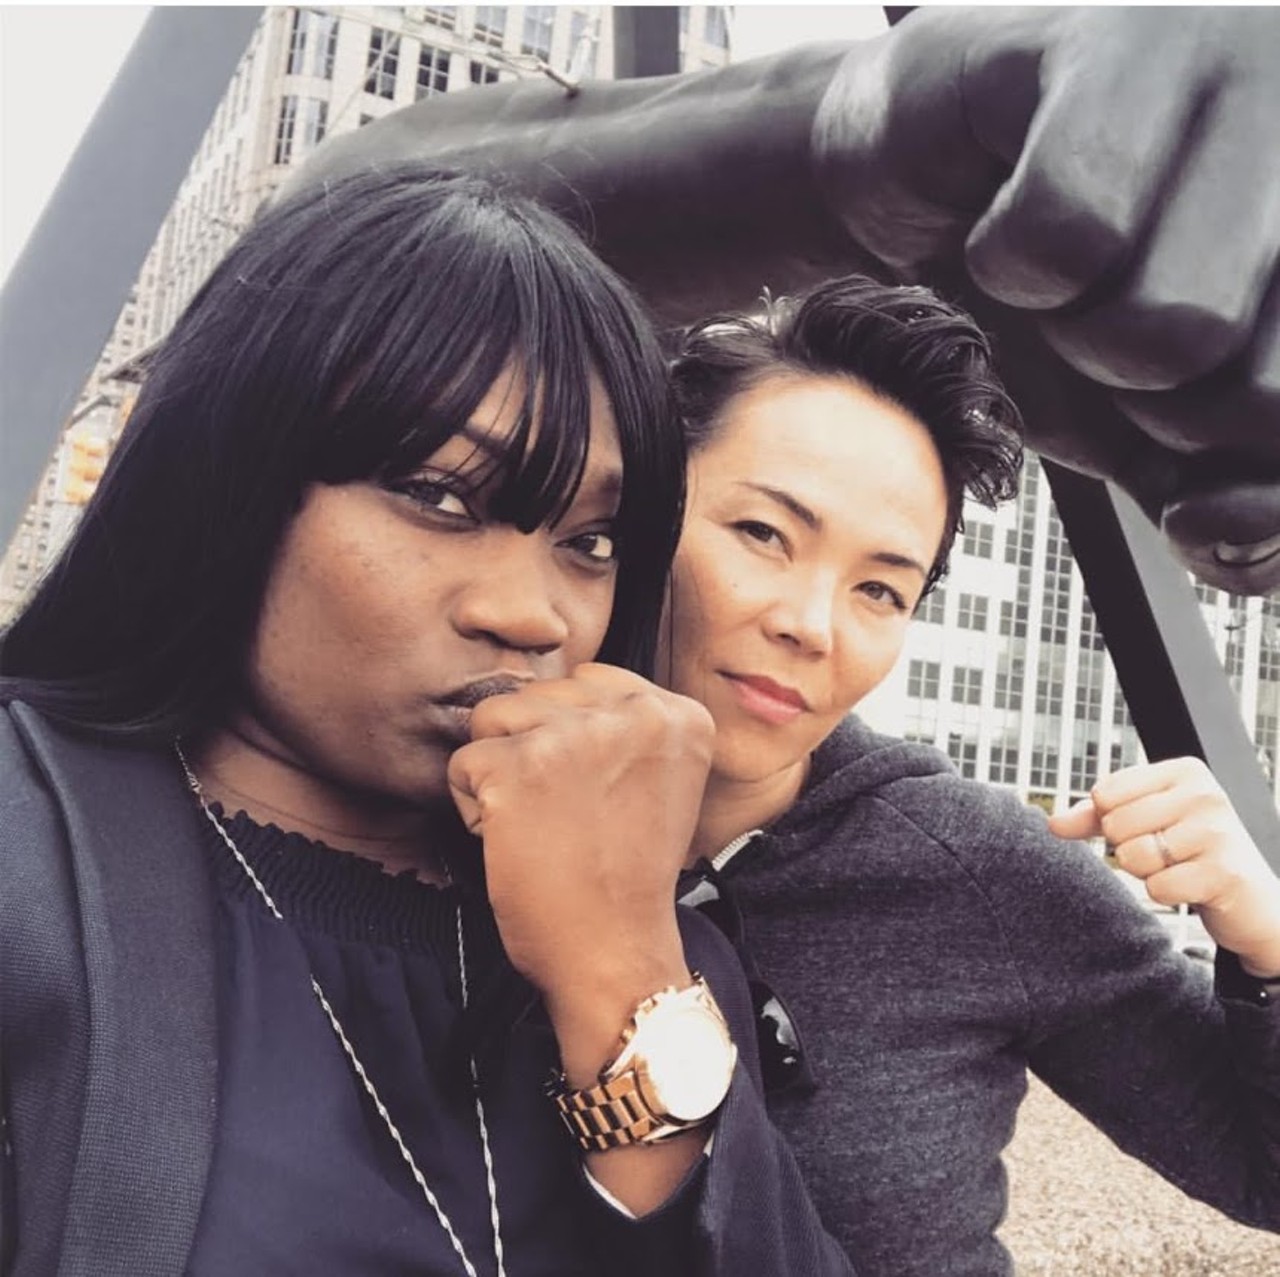 Joe Louis Memorial (The Fist) 
The Joe Louis Fist might be the most easily recognized symbol in Detroit iconography. It's in the heart of downtown Detroit and a selfie here proves you're in the middle of the city's ongoing renaissance. 
Photo via Instagram, katholmes_ 